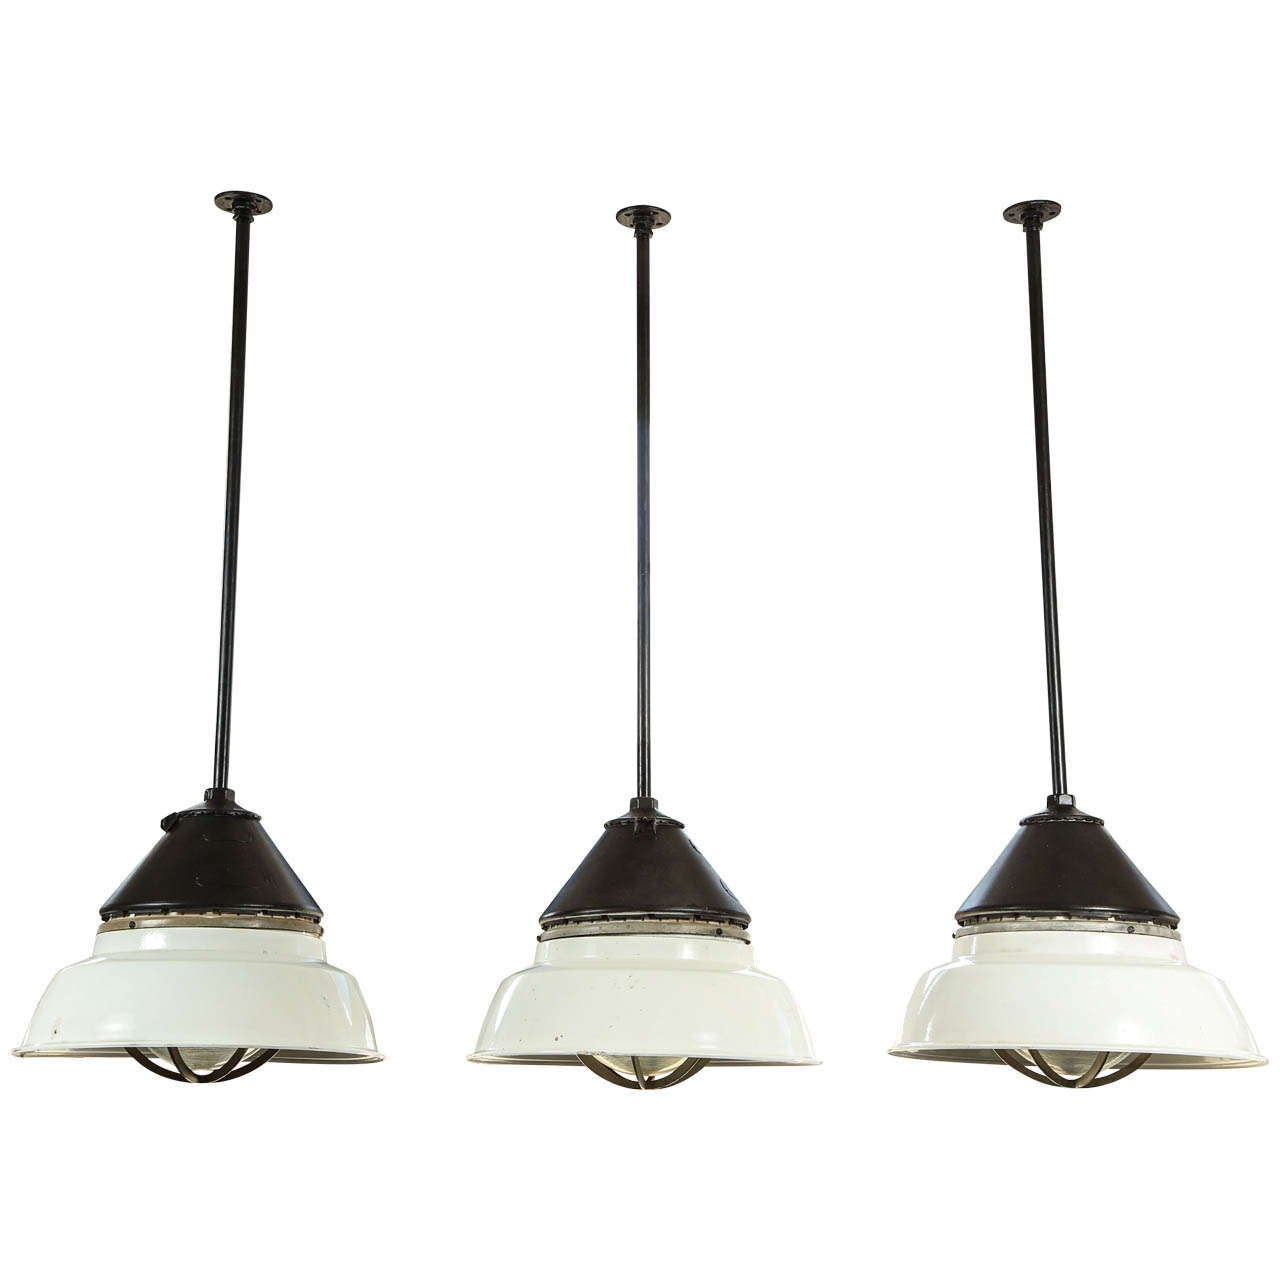 3 French Industrial 2 Tone Ceiling Lamps C. 1930